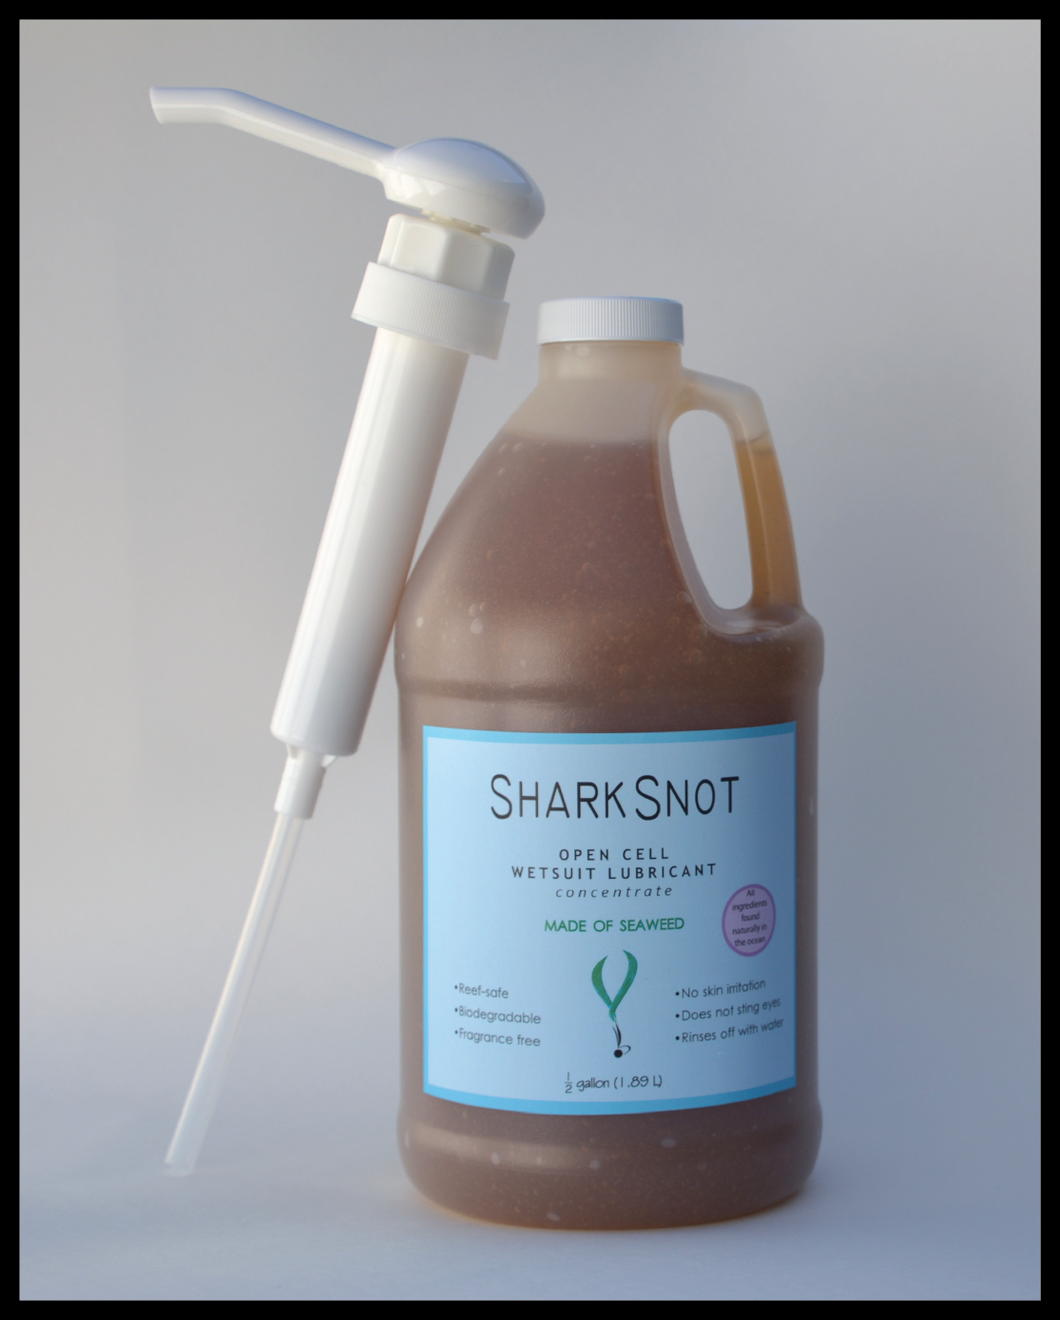 Shark Snot half gallon pump open cell wetsuit lube lubricant freedive spearfish freediving spearfishing biodegradable eco-friendly seaweed based natural